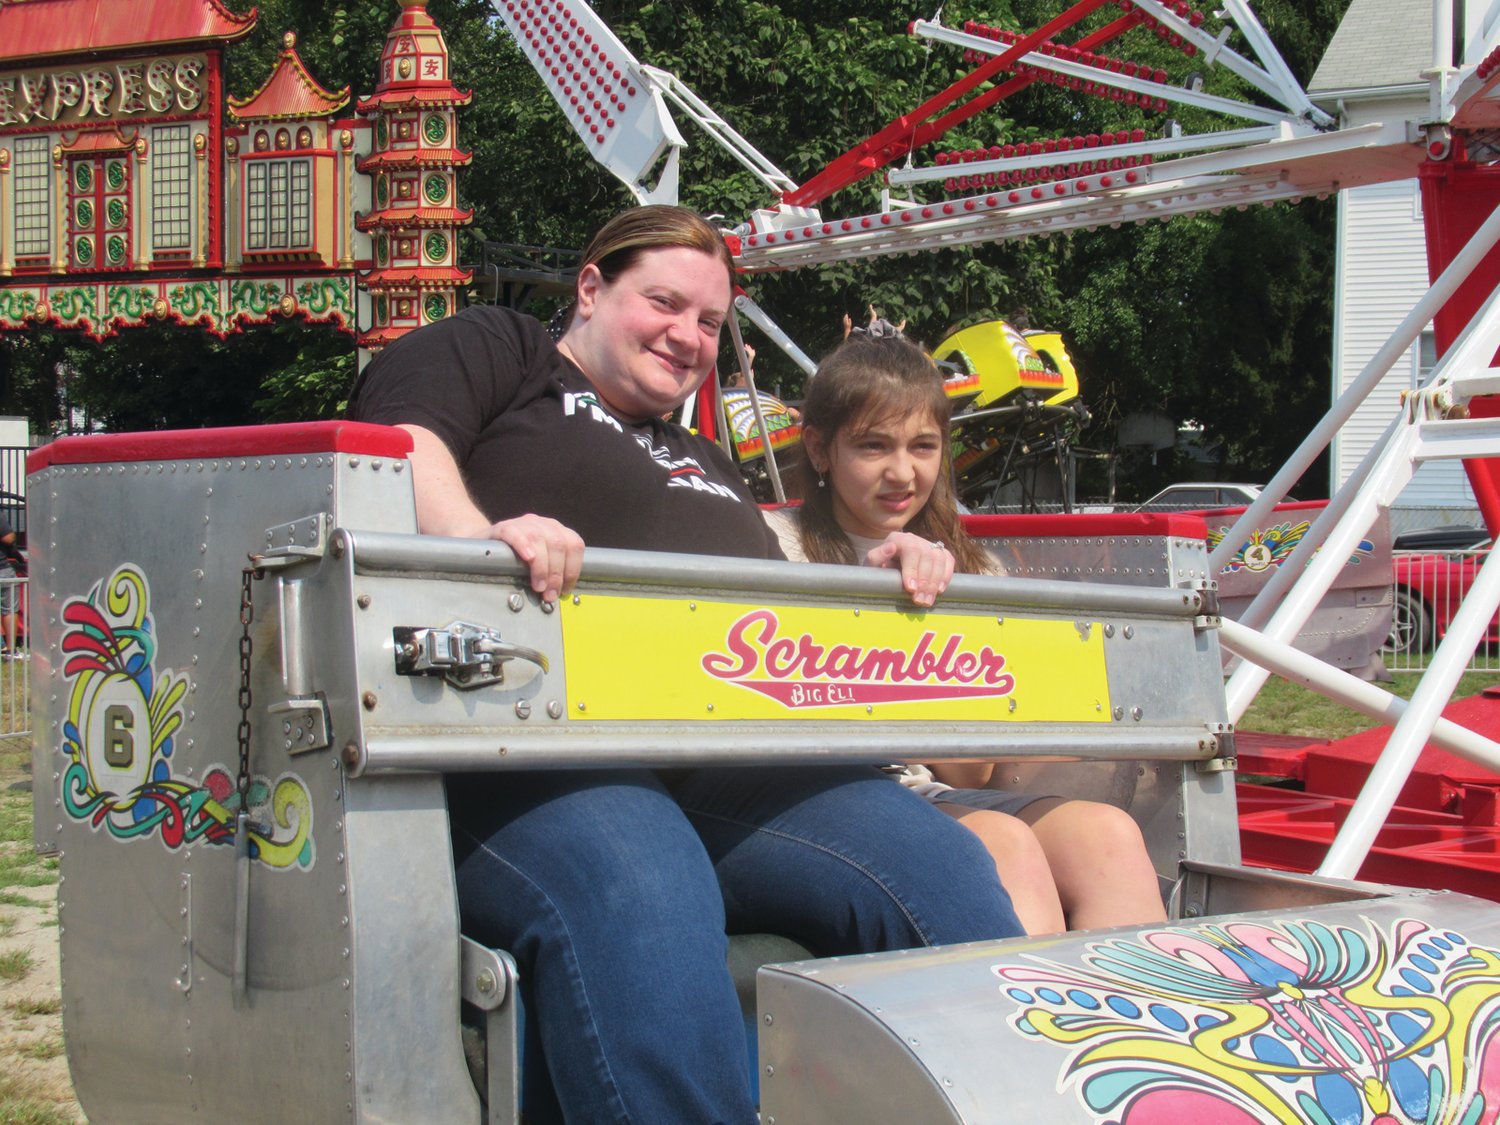 SPECIAL SCRAMBLE: Andrea Aiello (lest) and Olivia Miele enjoy a brief stop during this ride in Rockwell Amusements famed Scrambler.